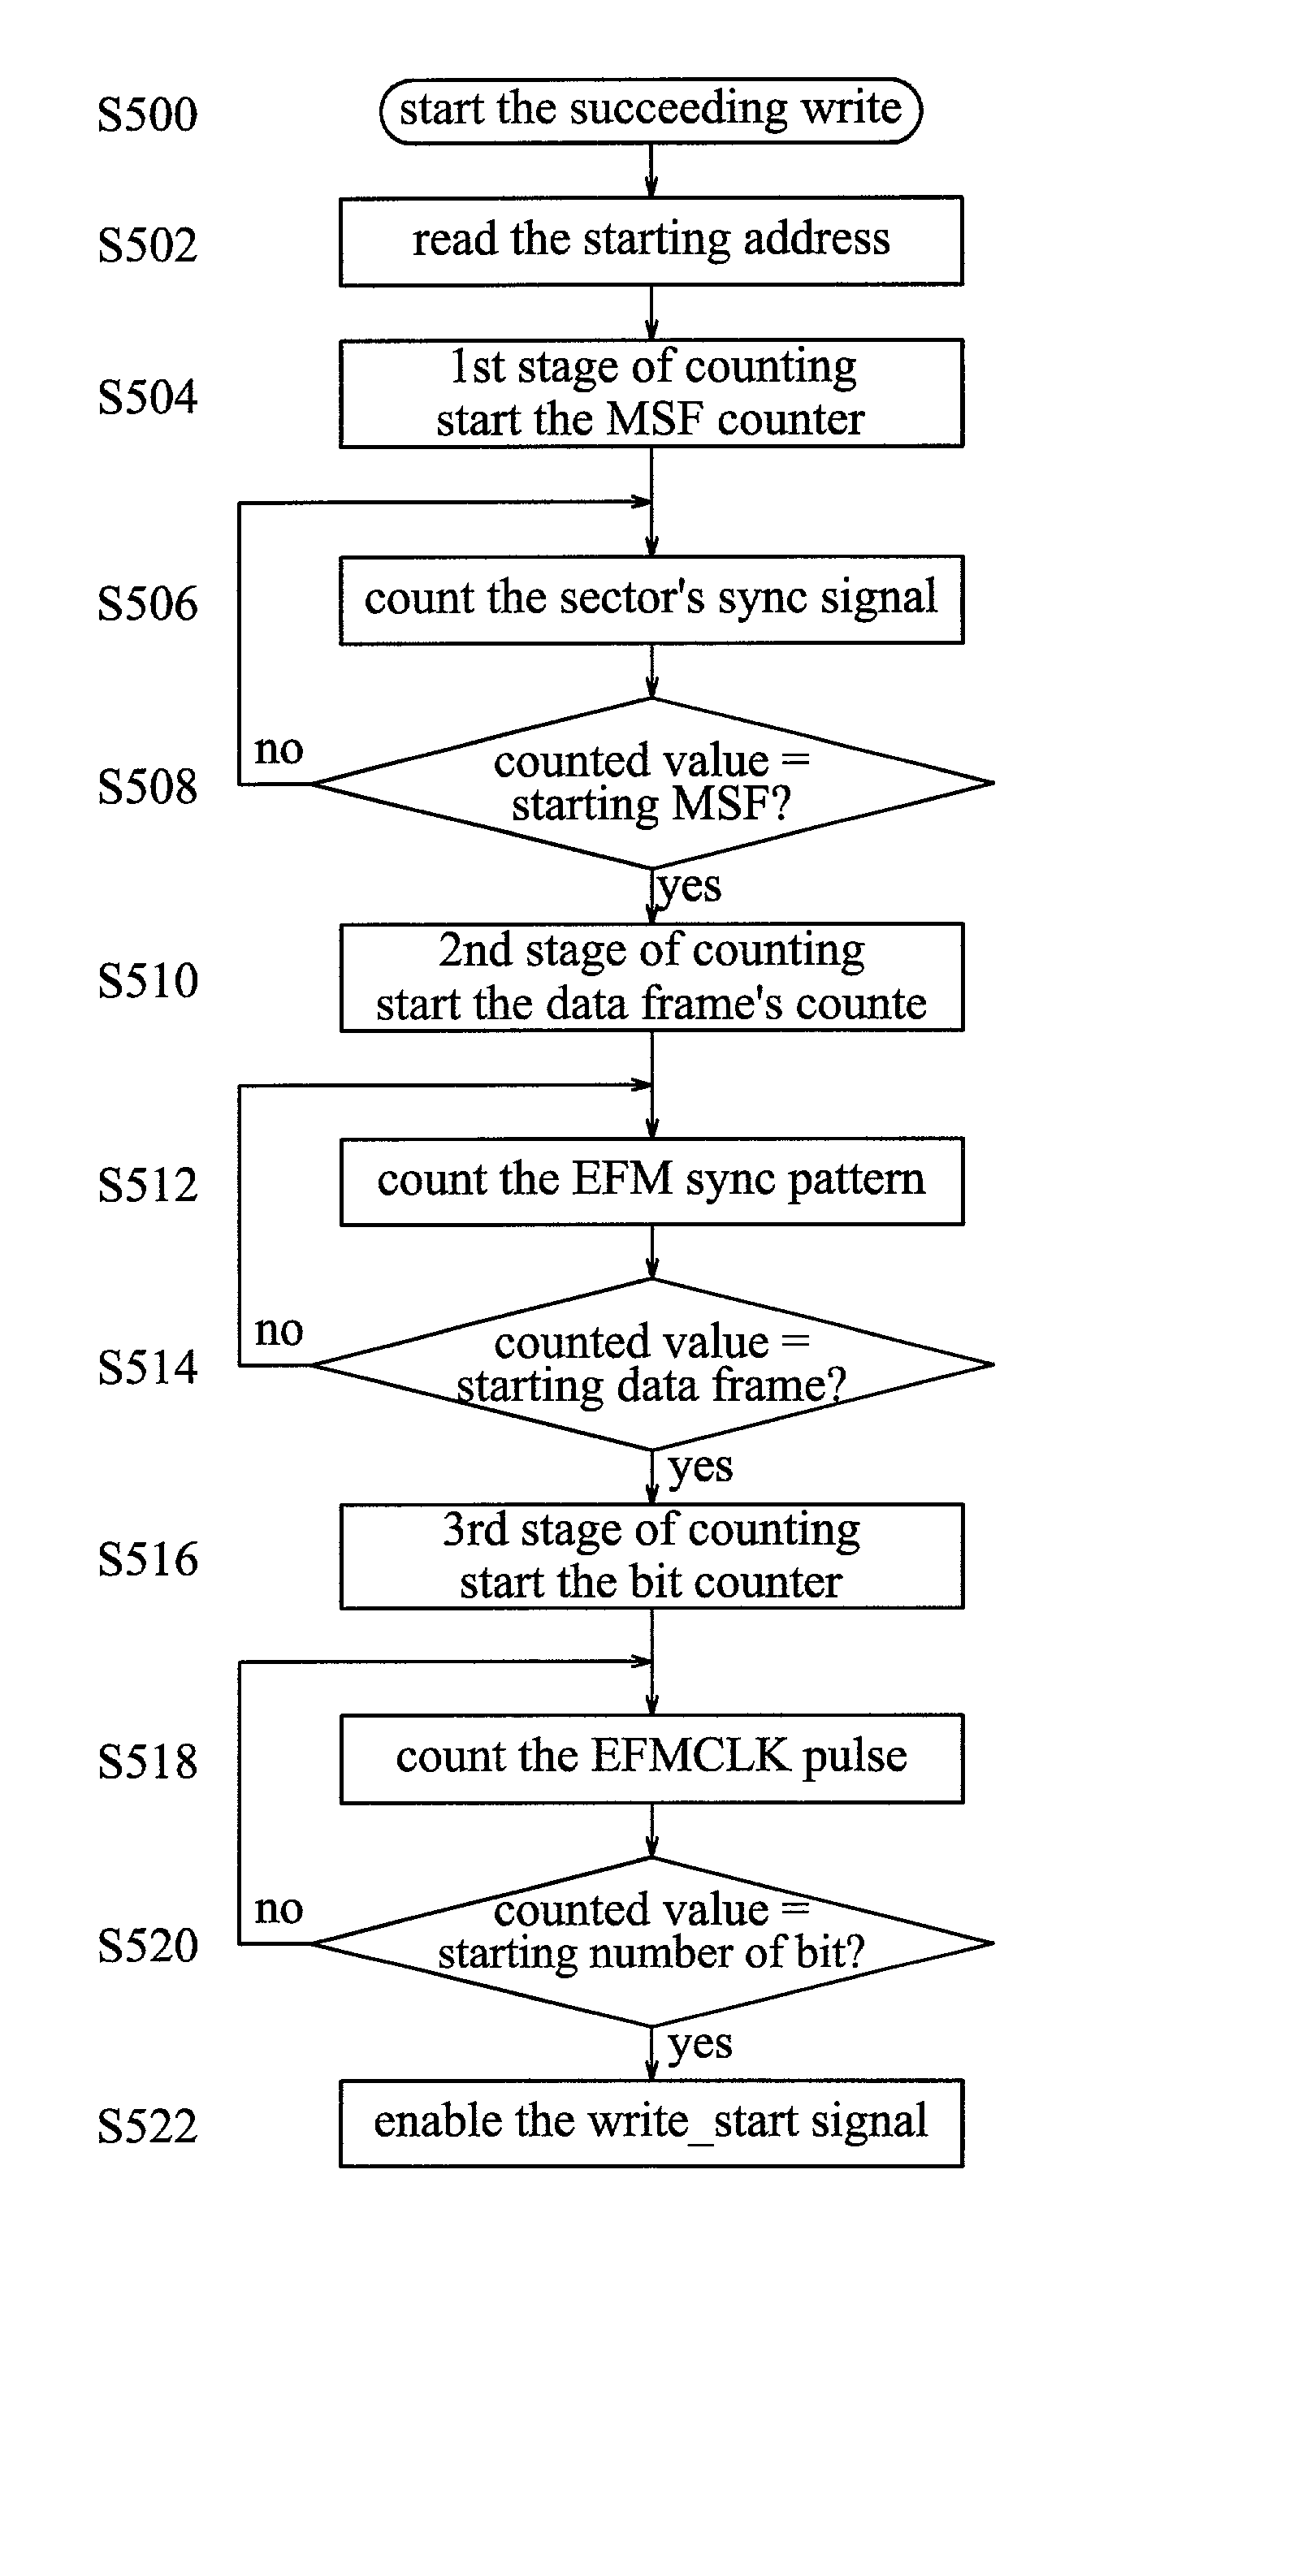 Link writing method for a recordable compact disk and driver for using the method